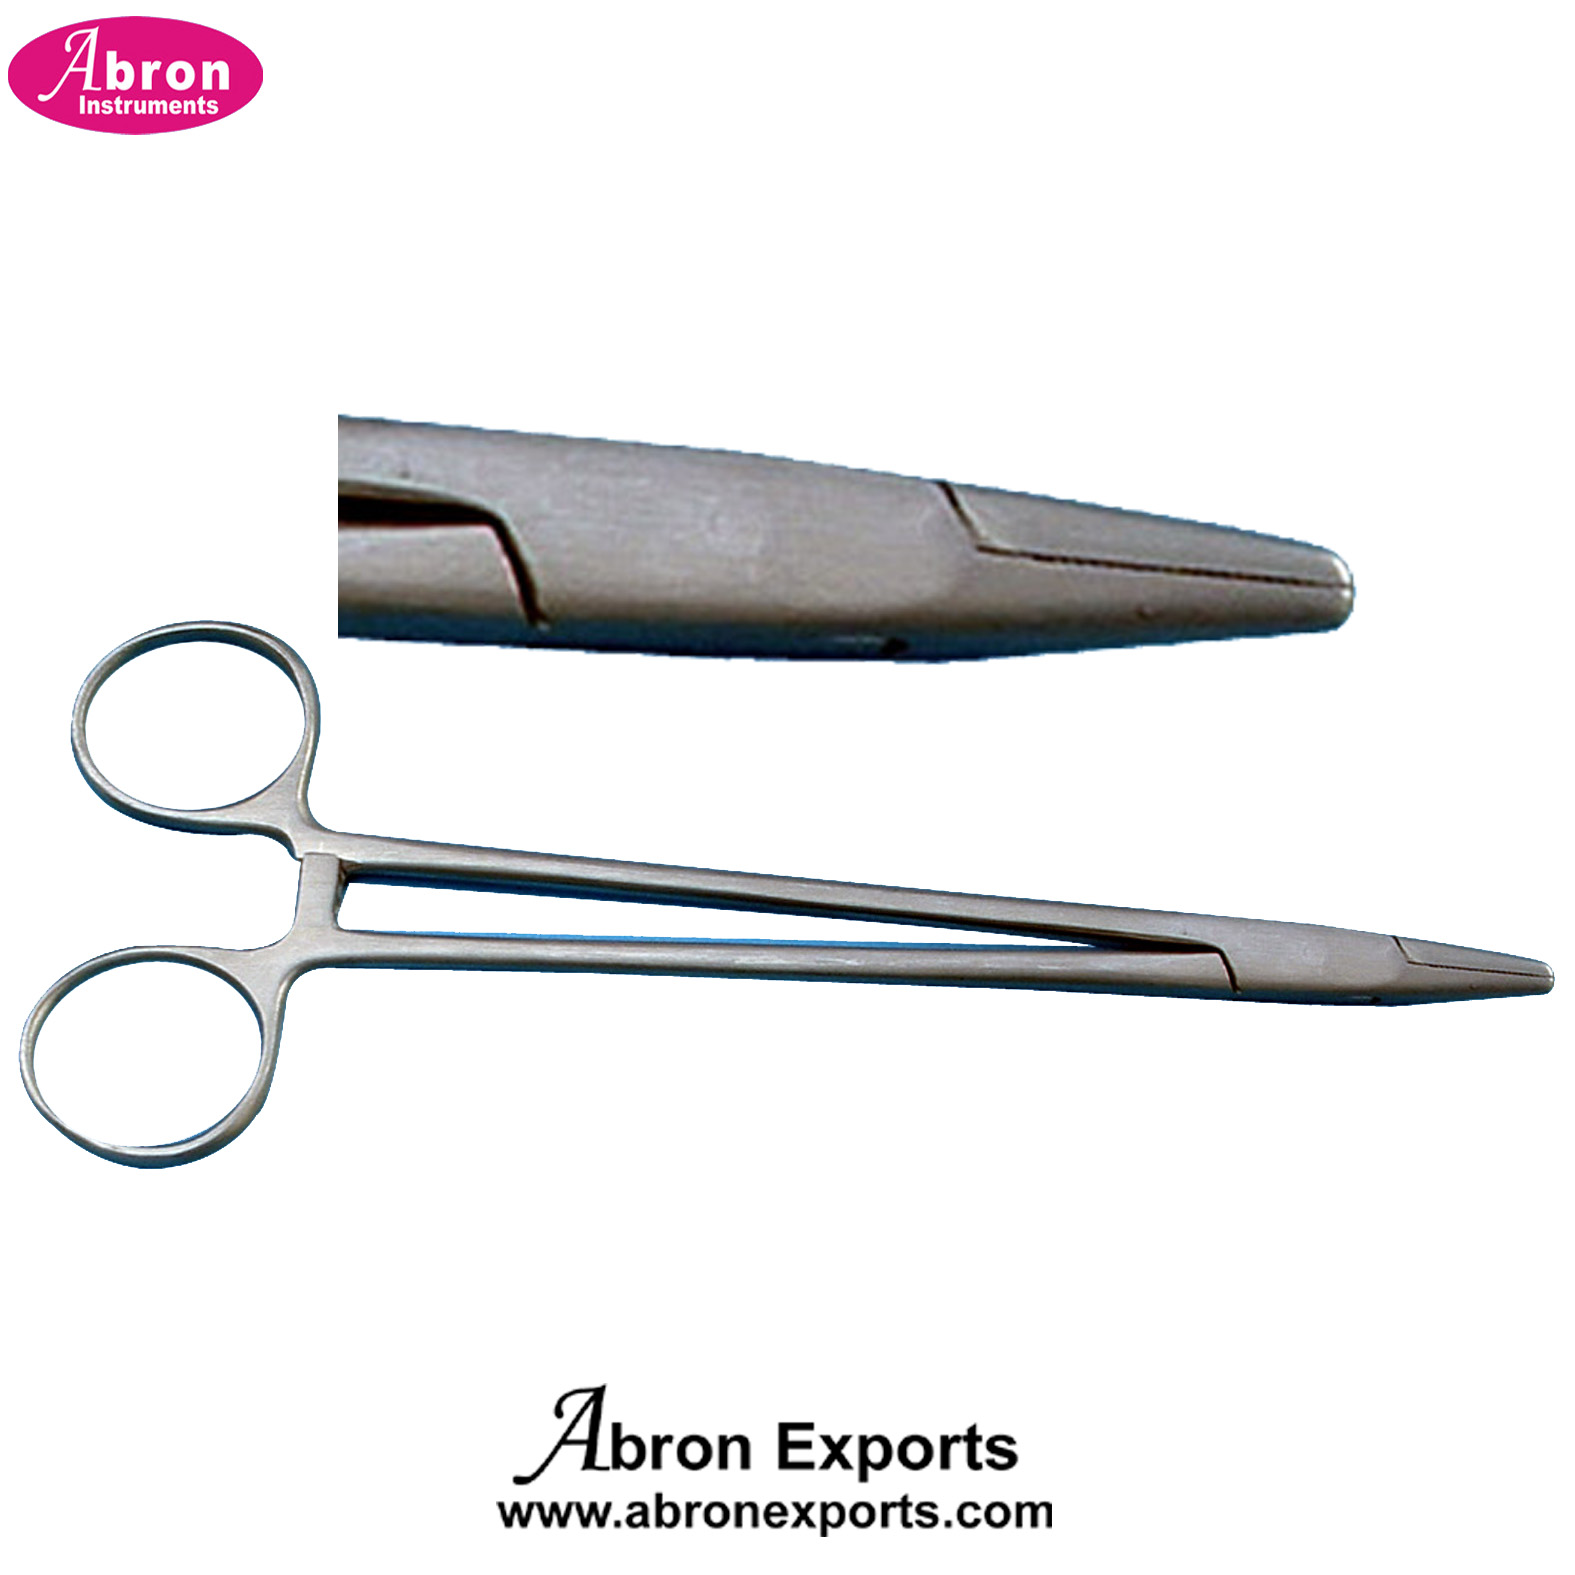 Scissors Surgical Needle Holder Forceps All Stainless steel Meals SS Handle 10pc Abron AB-568MN